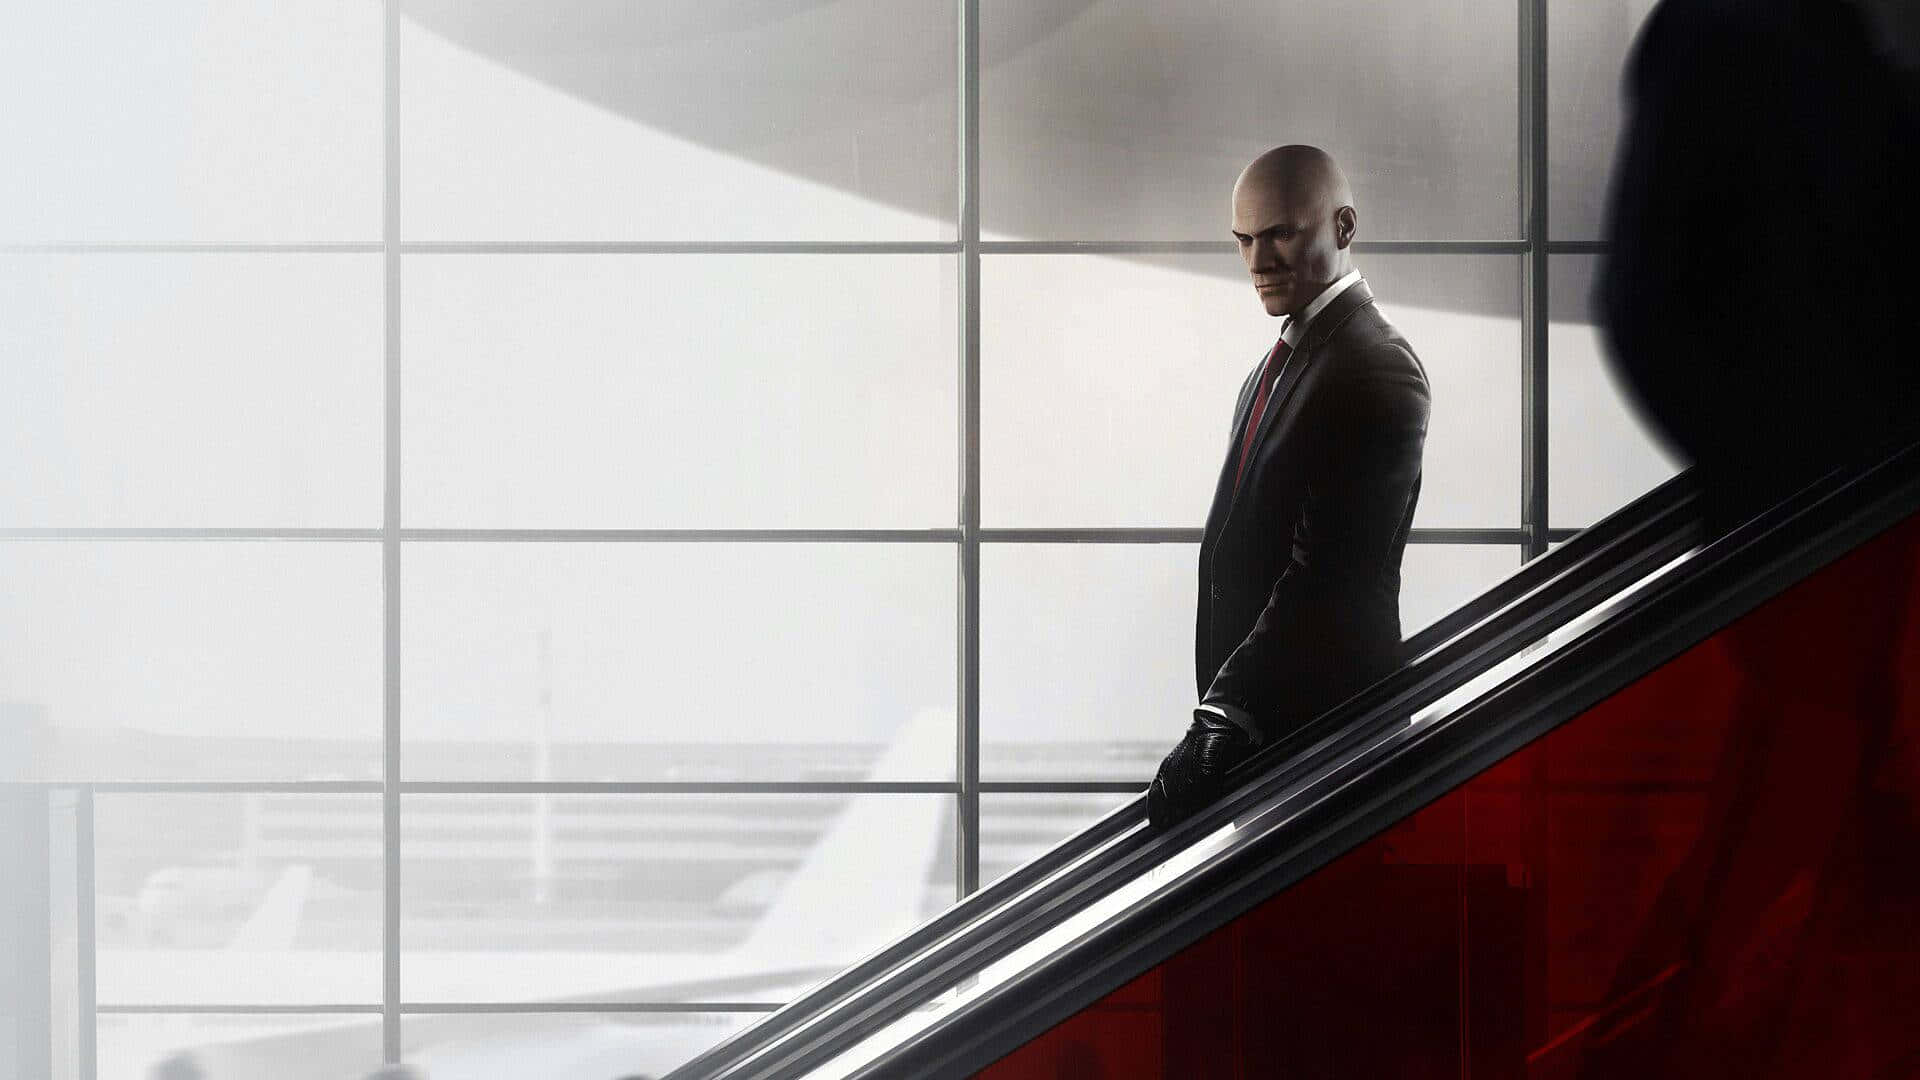 Agent 47, dressed in his signature suit and tie, disposes of a criminal in a game of cat and mouse.